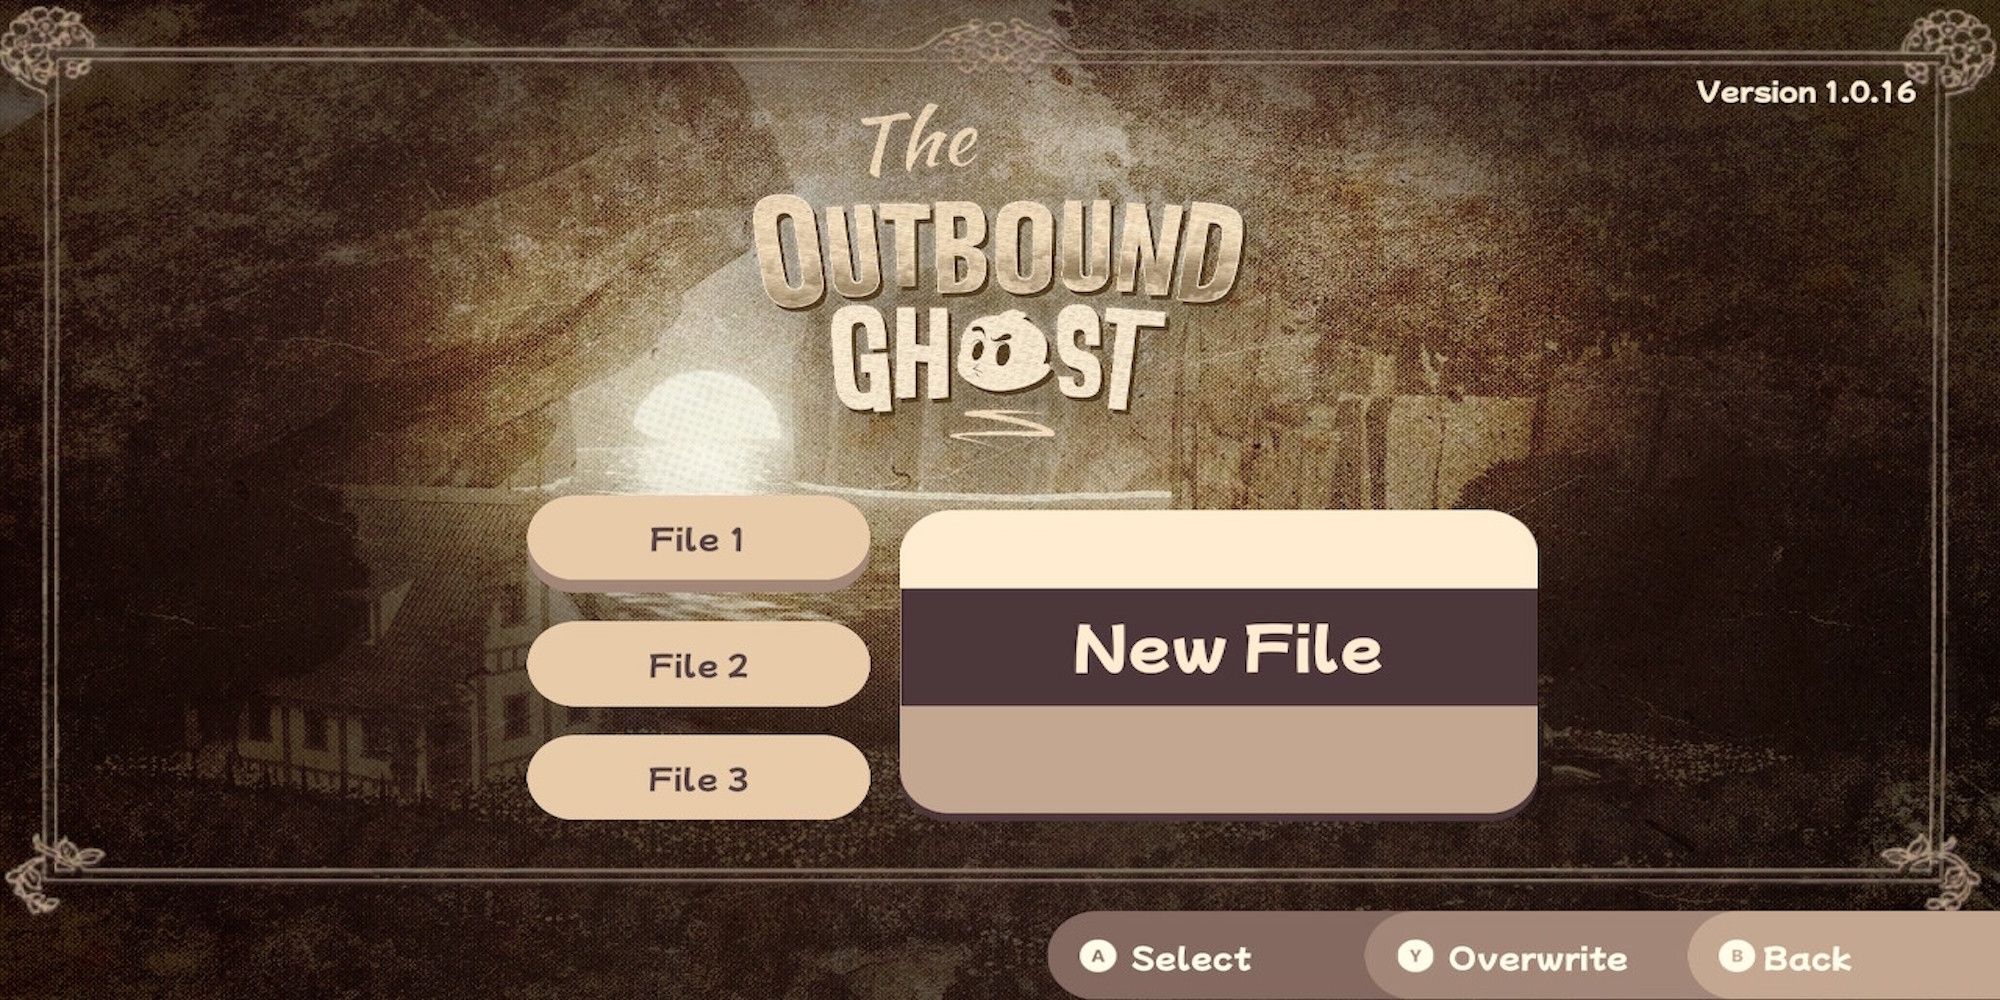 The save menu in The Outbound Ghost